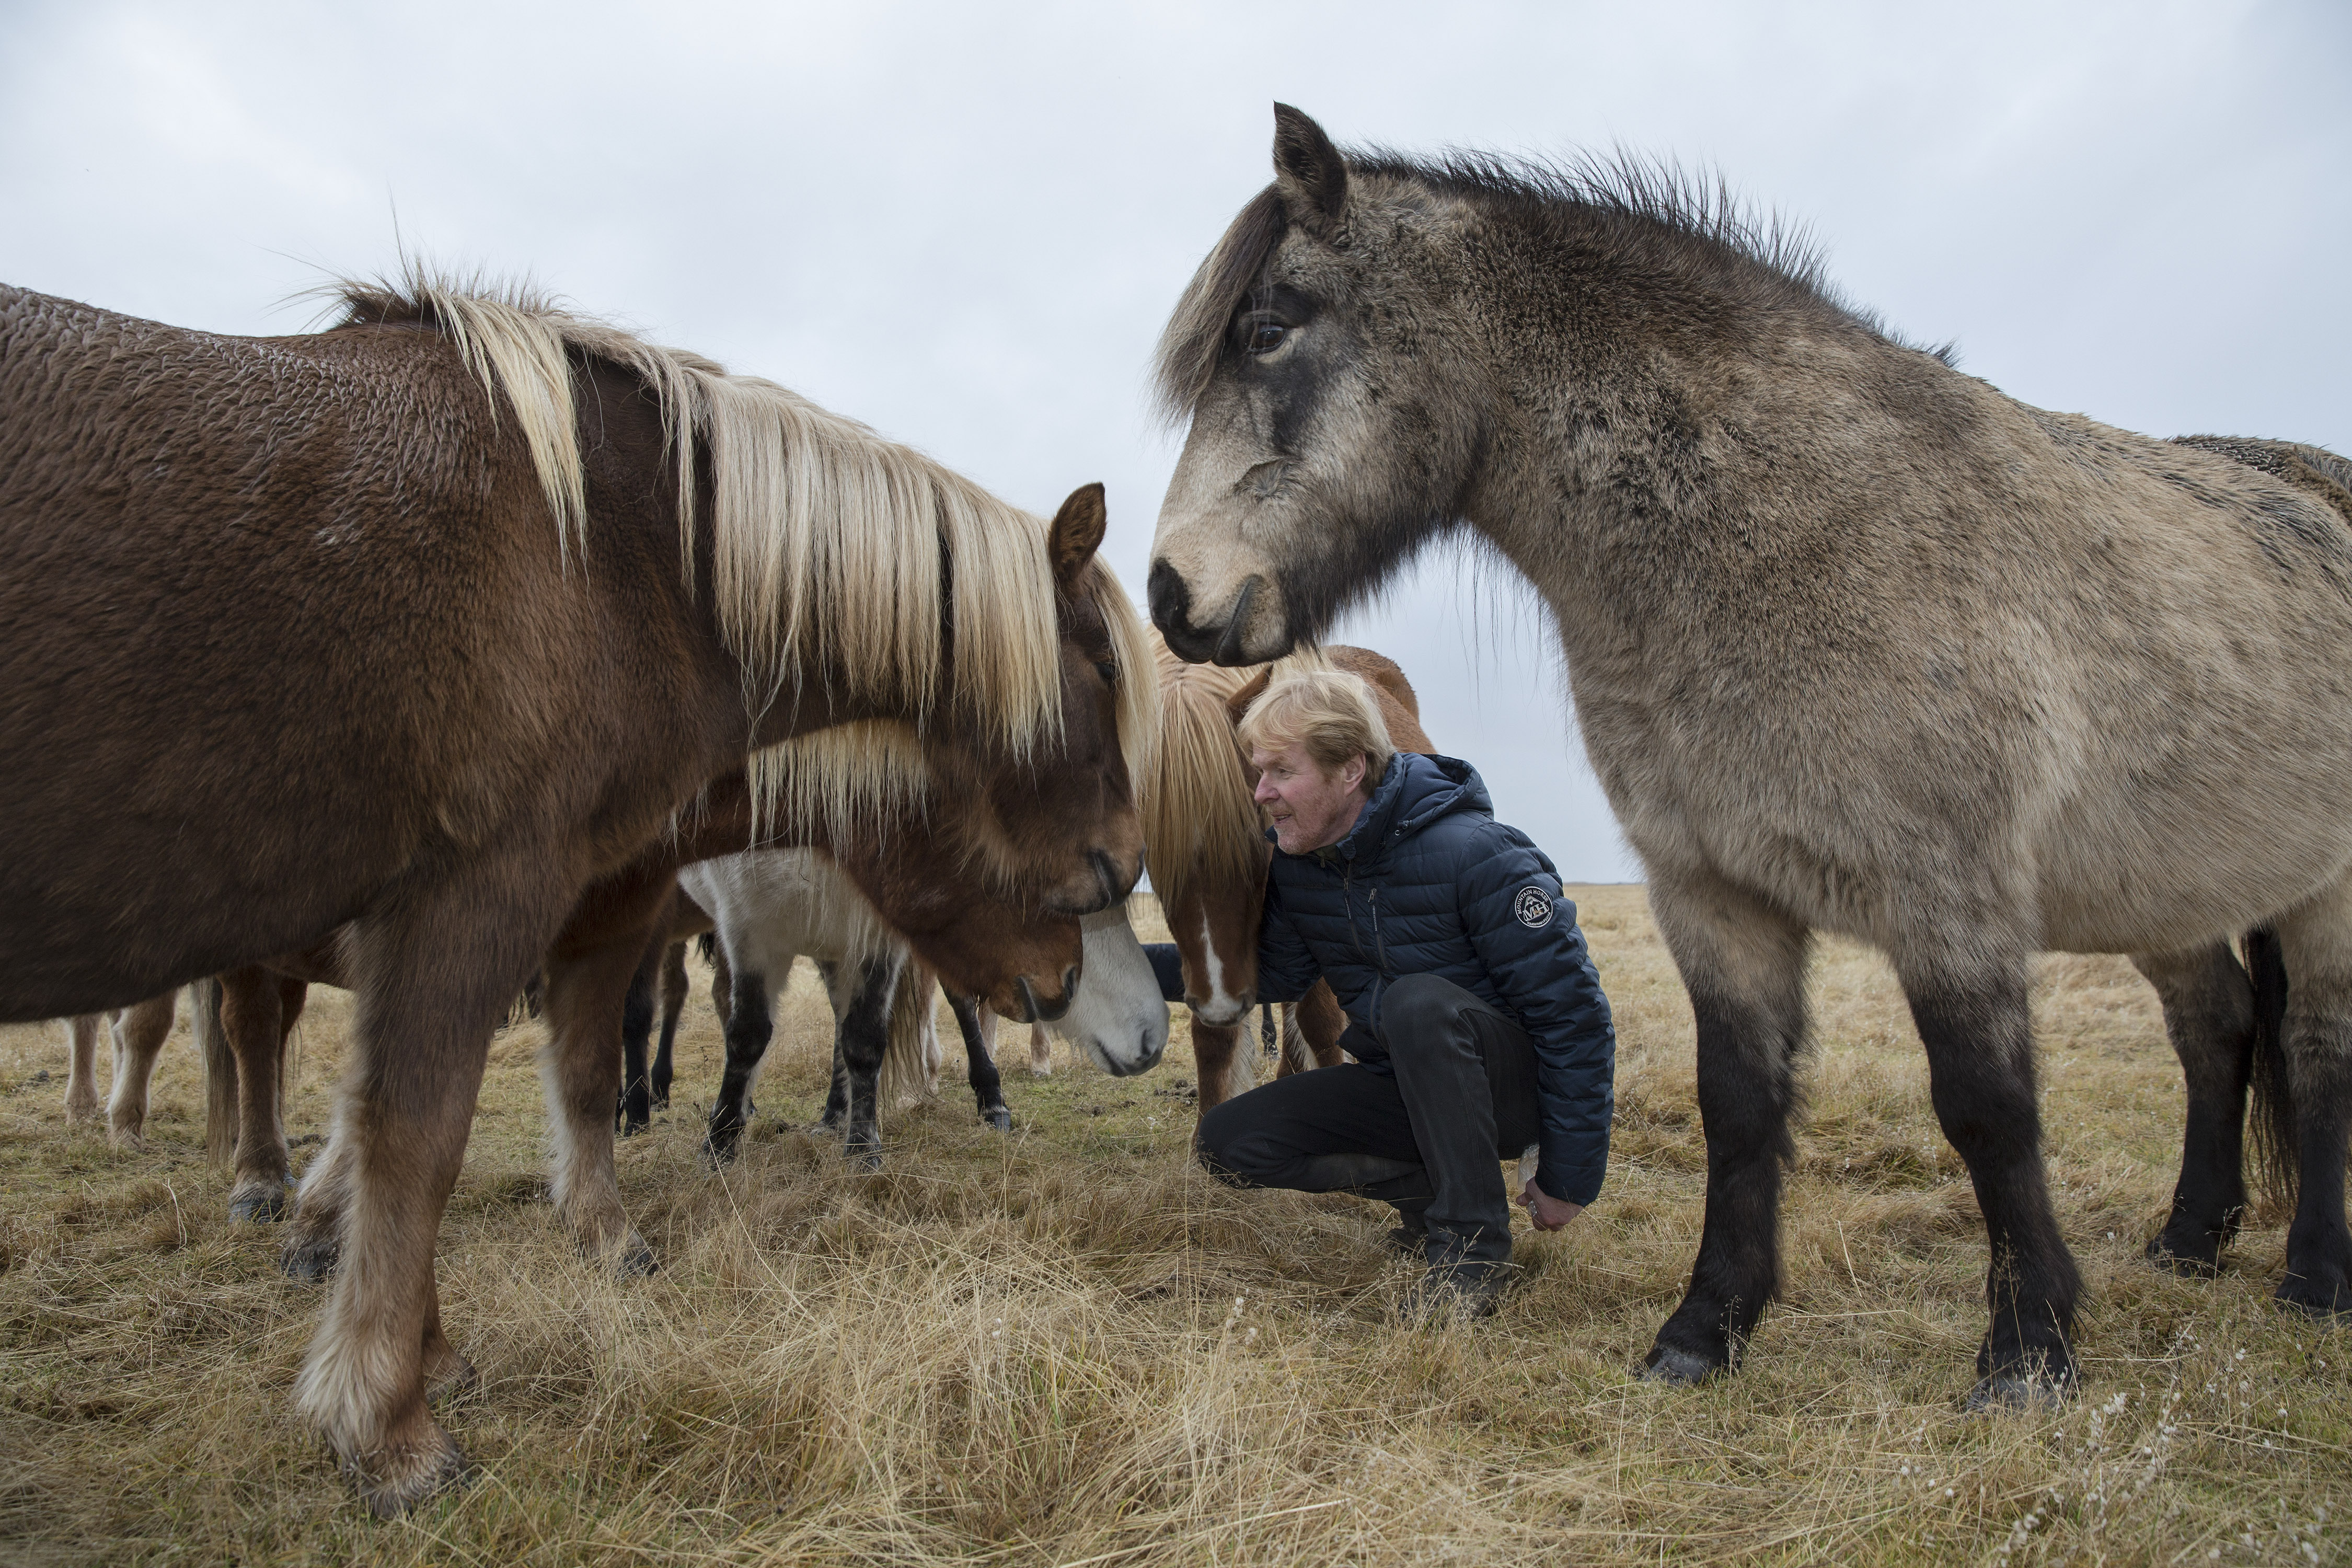 Diddi Bardarson, who predicts another crash and has put his financial security into breeding Iceland’s famous horses, on his ranch in Hella, a town southeast of Reykjavik, Nov. 12, 2016. (Bara Kristinsdottir/The New York Times)